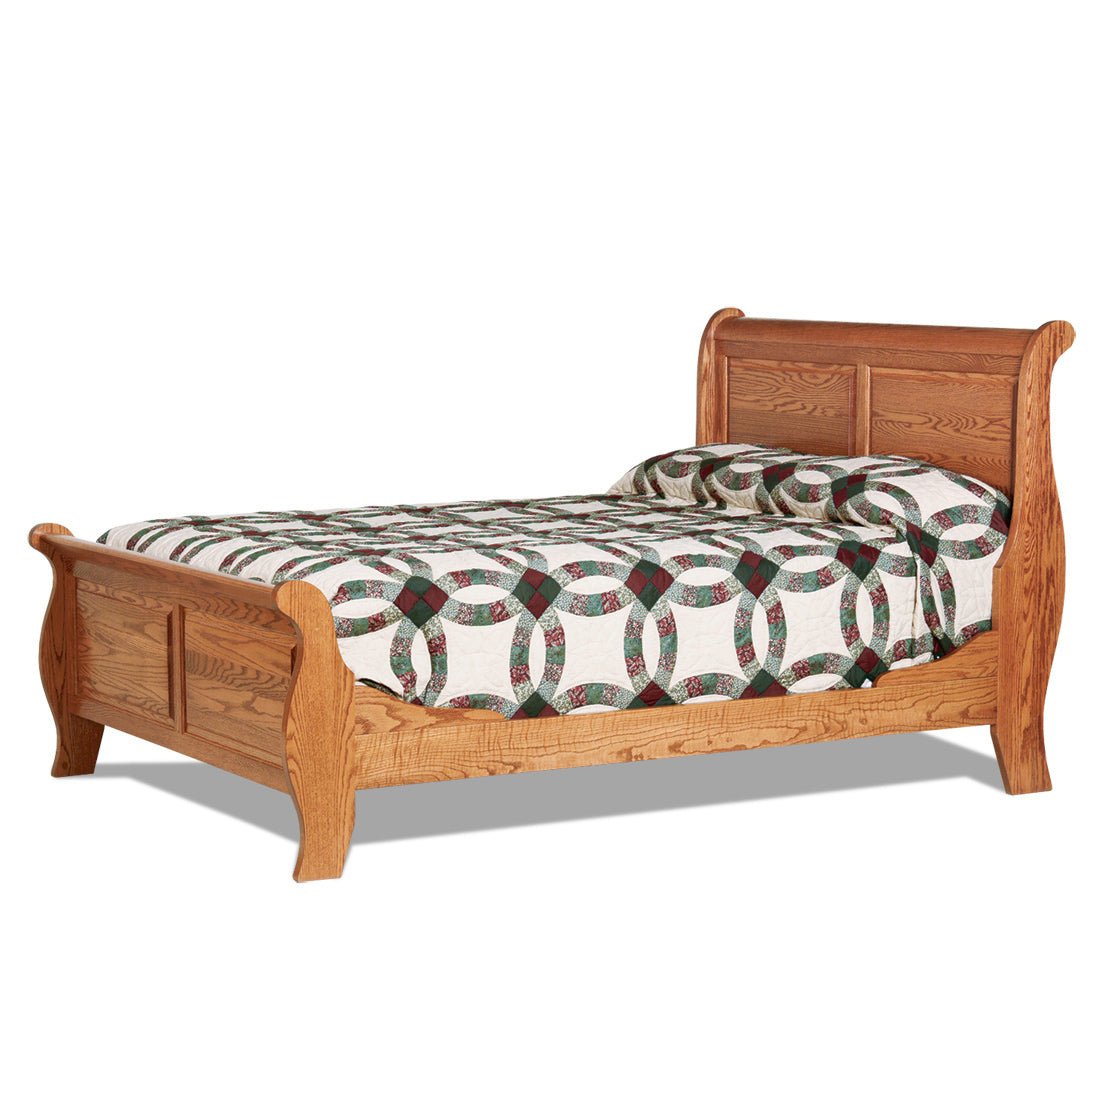 Jamestown Captain Sleigh Bed - snyders.furniture